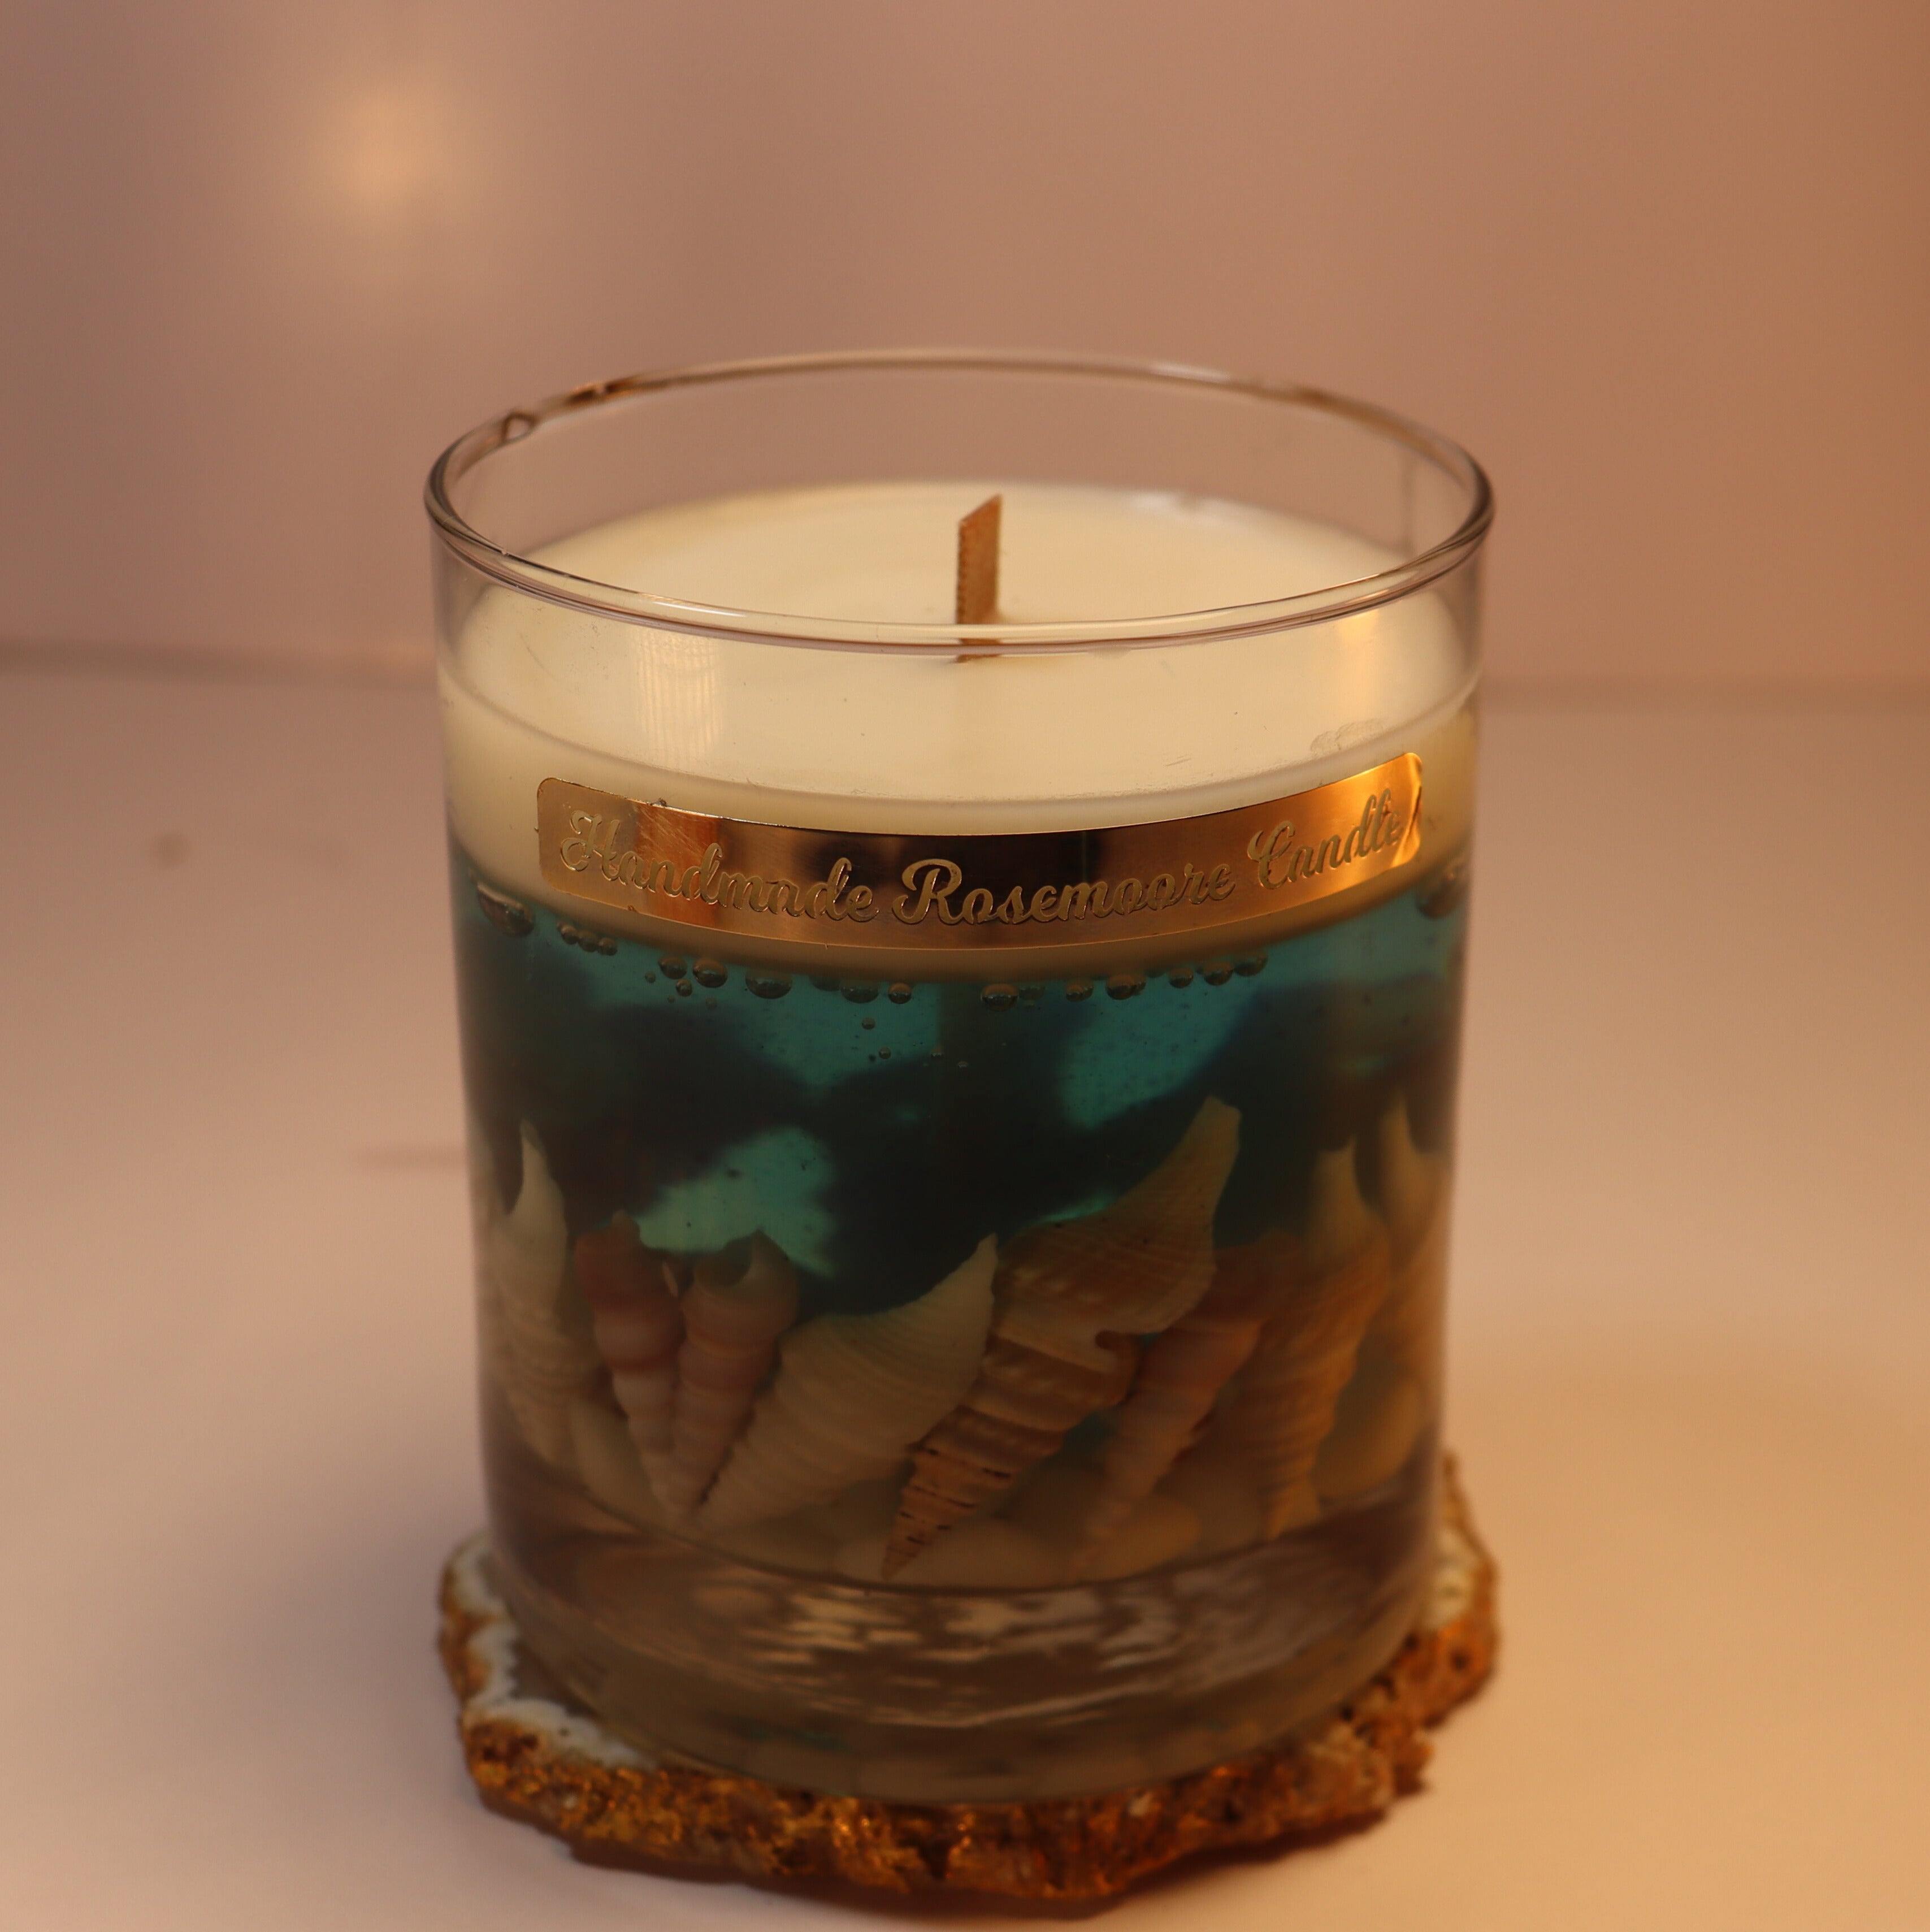 Rosemoore Sea Shell Scented Gel Candle